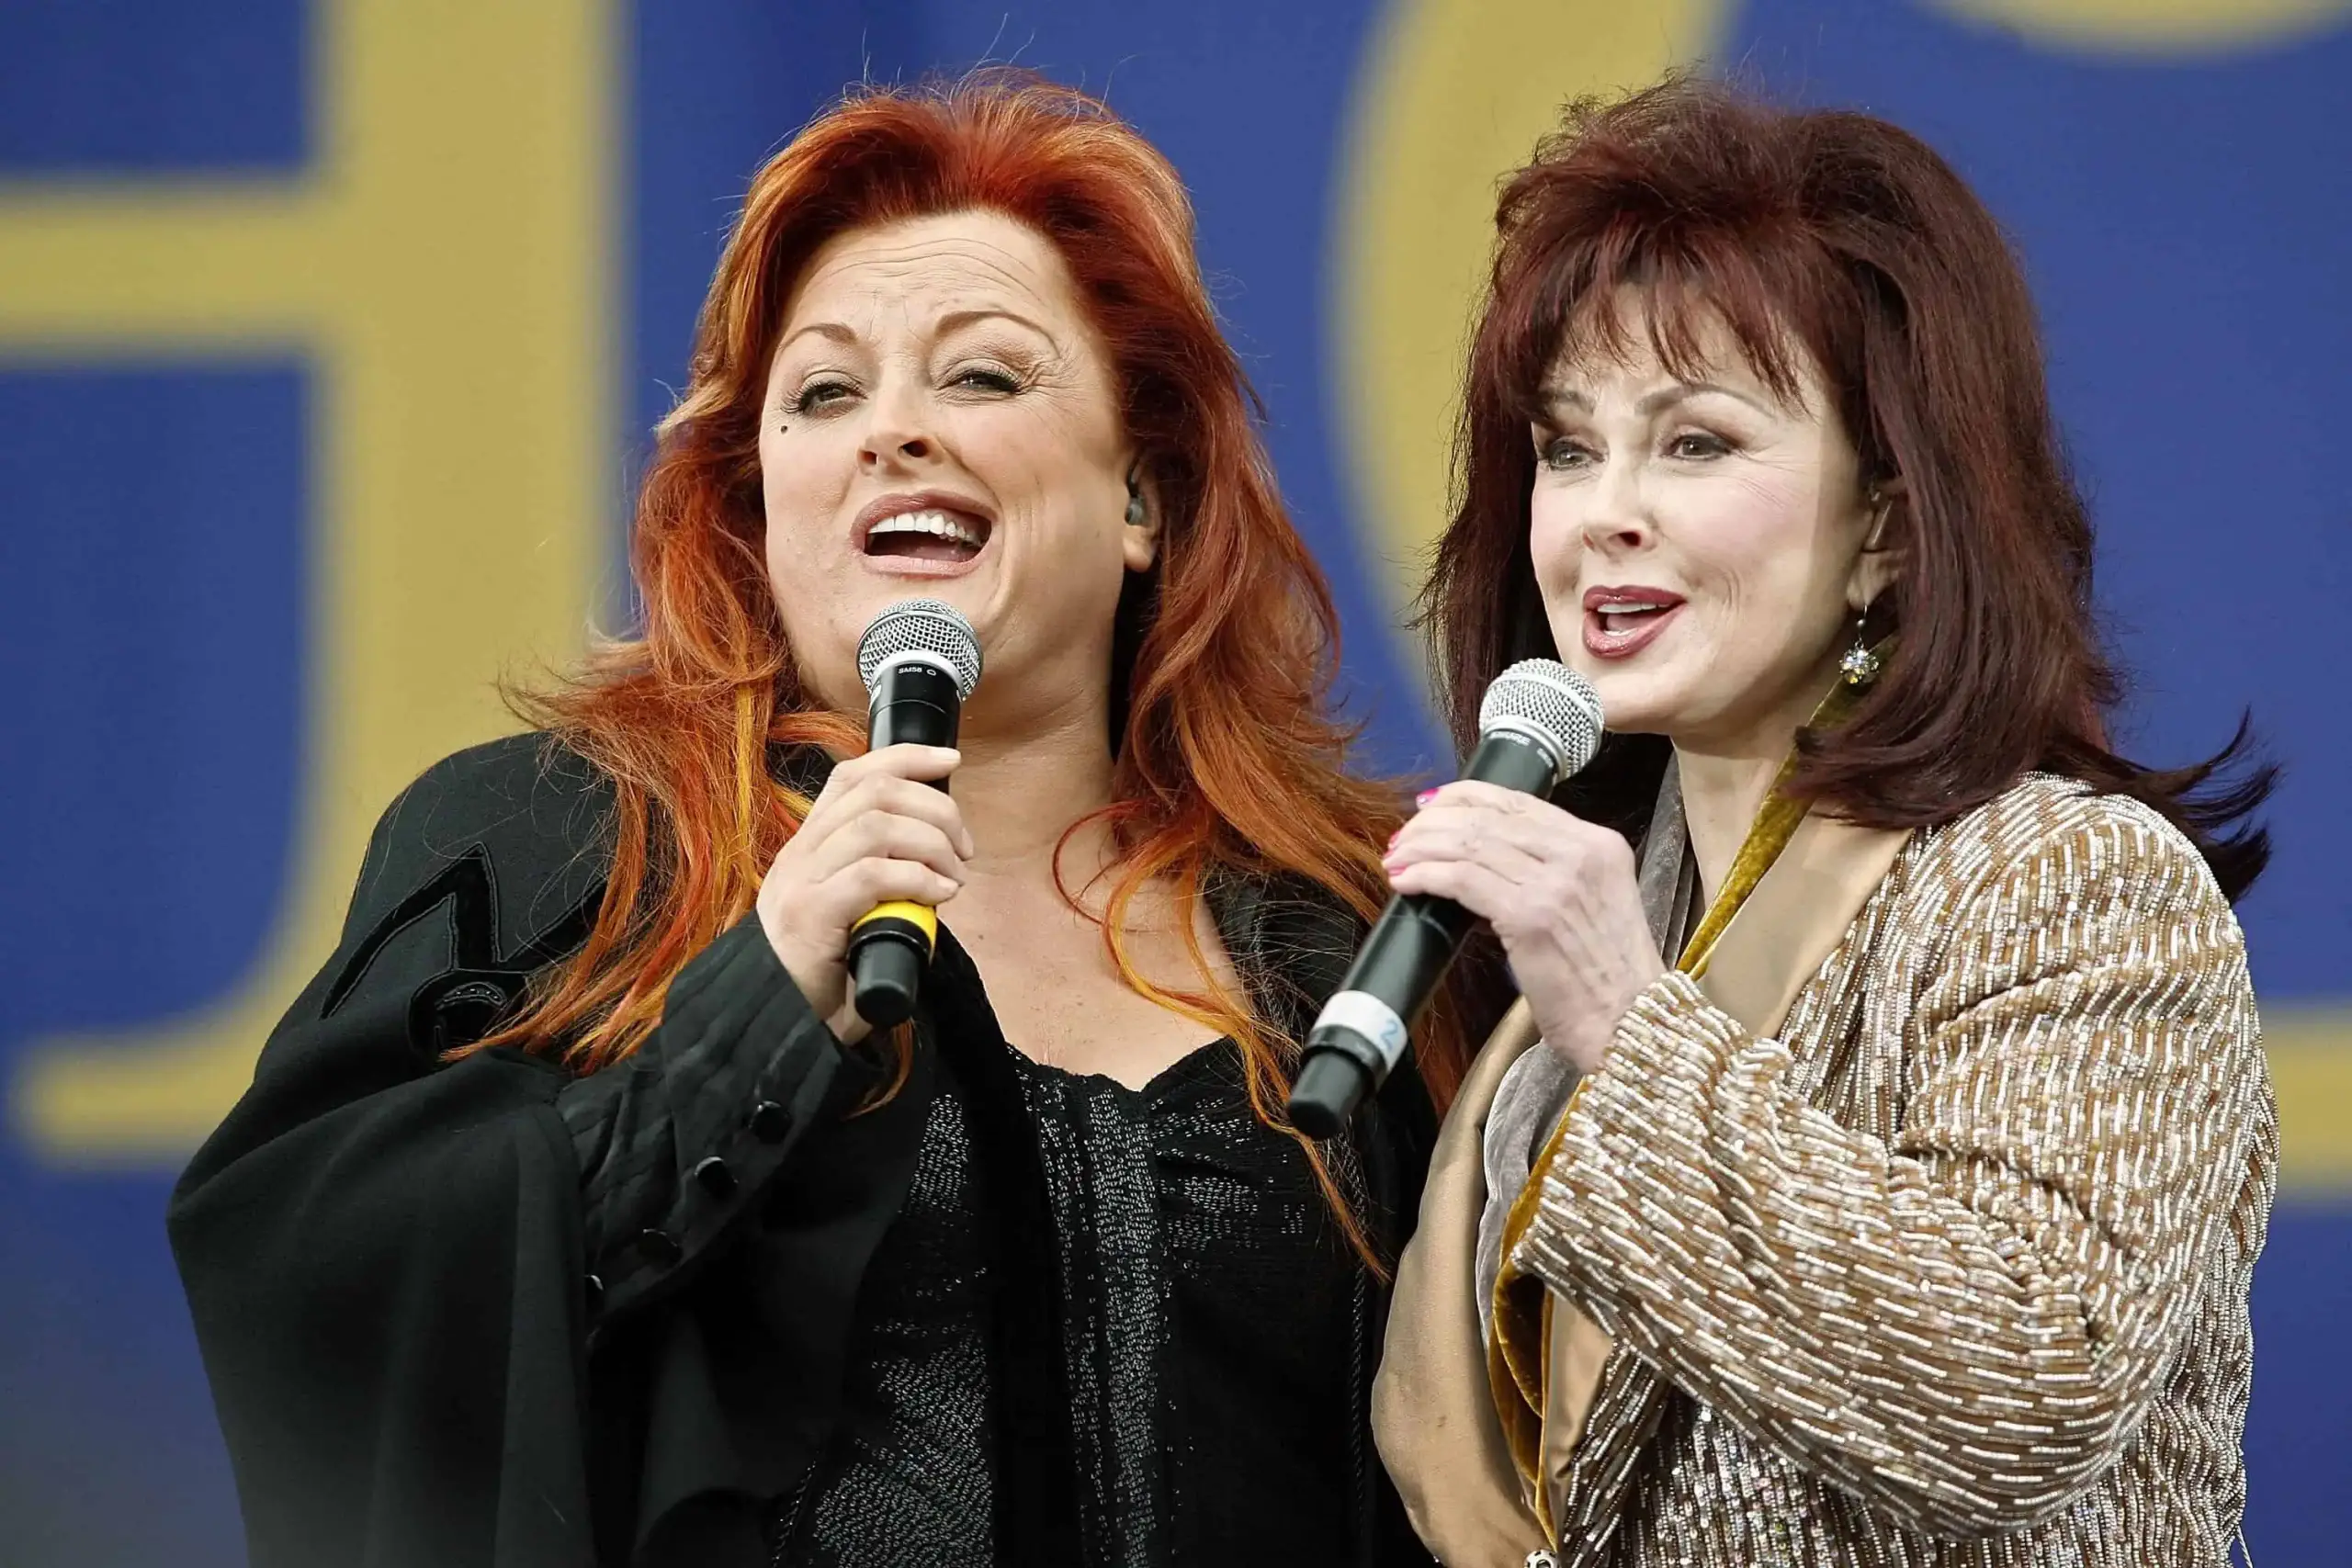 Naomi Judd and Wynonna singing at the ceremony of the Martin Luther King Jr. National Memorial in Washington D.C in 2006 | Source: Getty Images